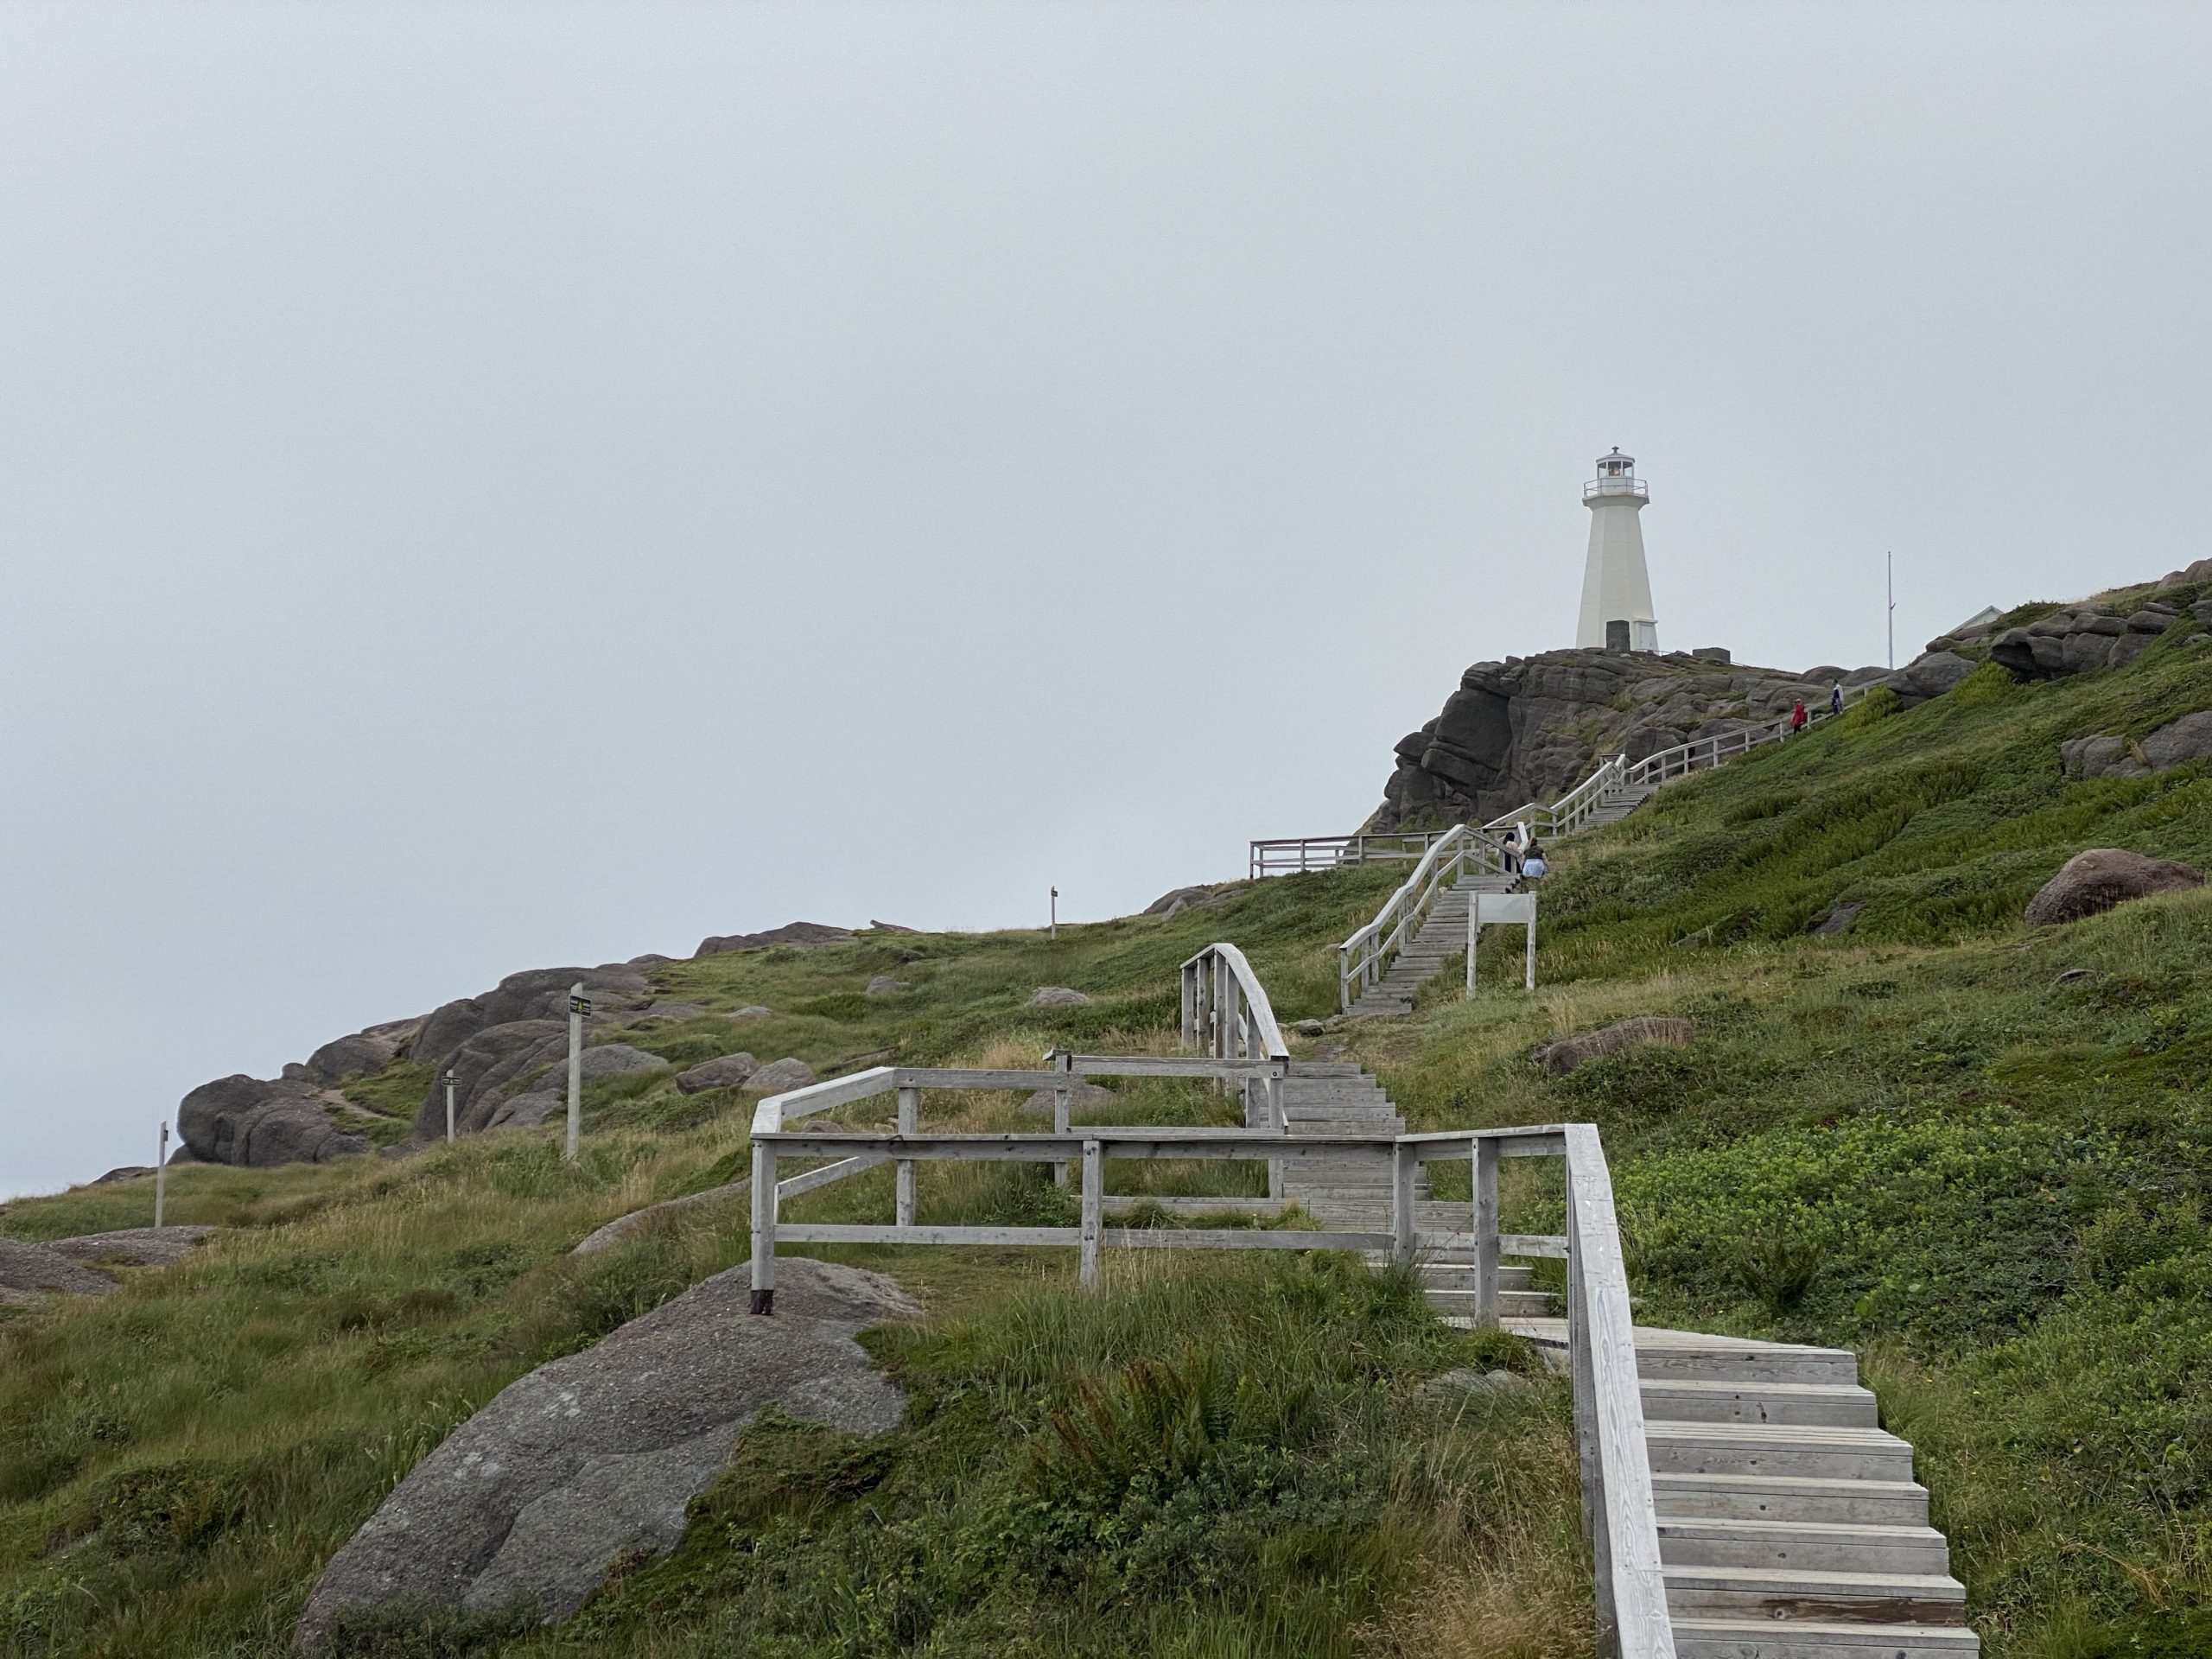 Some of the walkway stairs at the Cape Spear lighthouse.